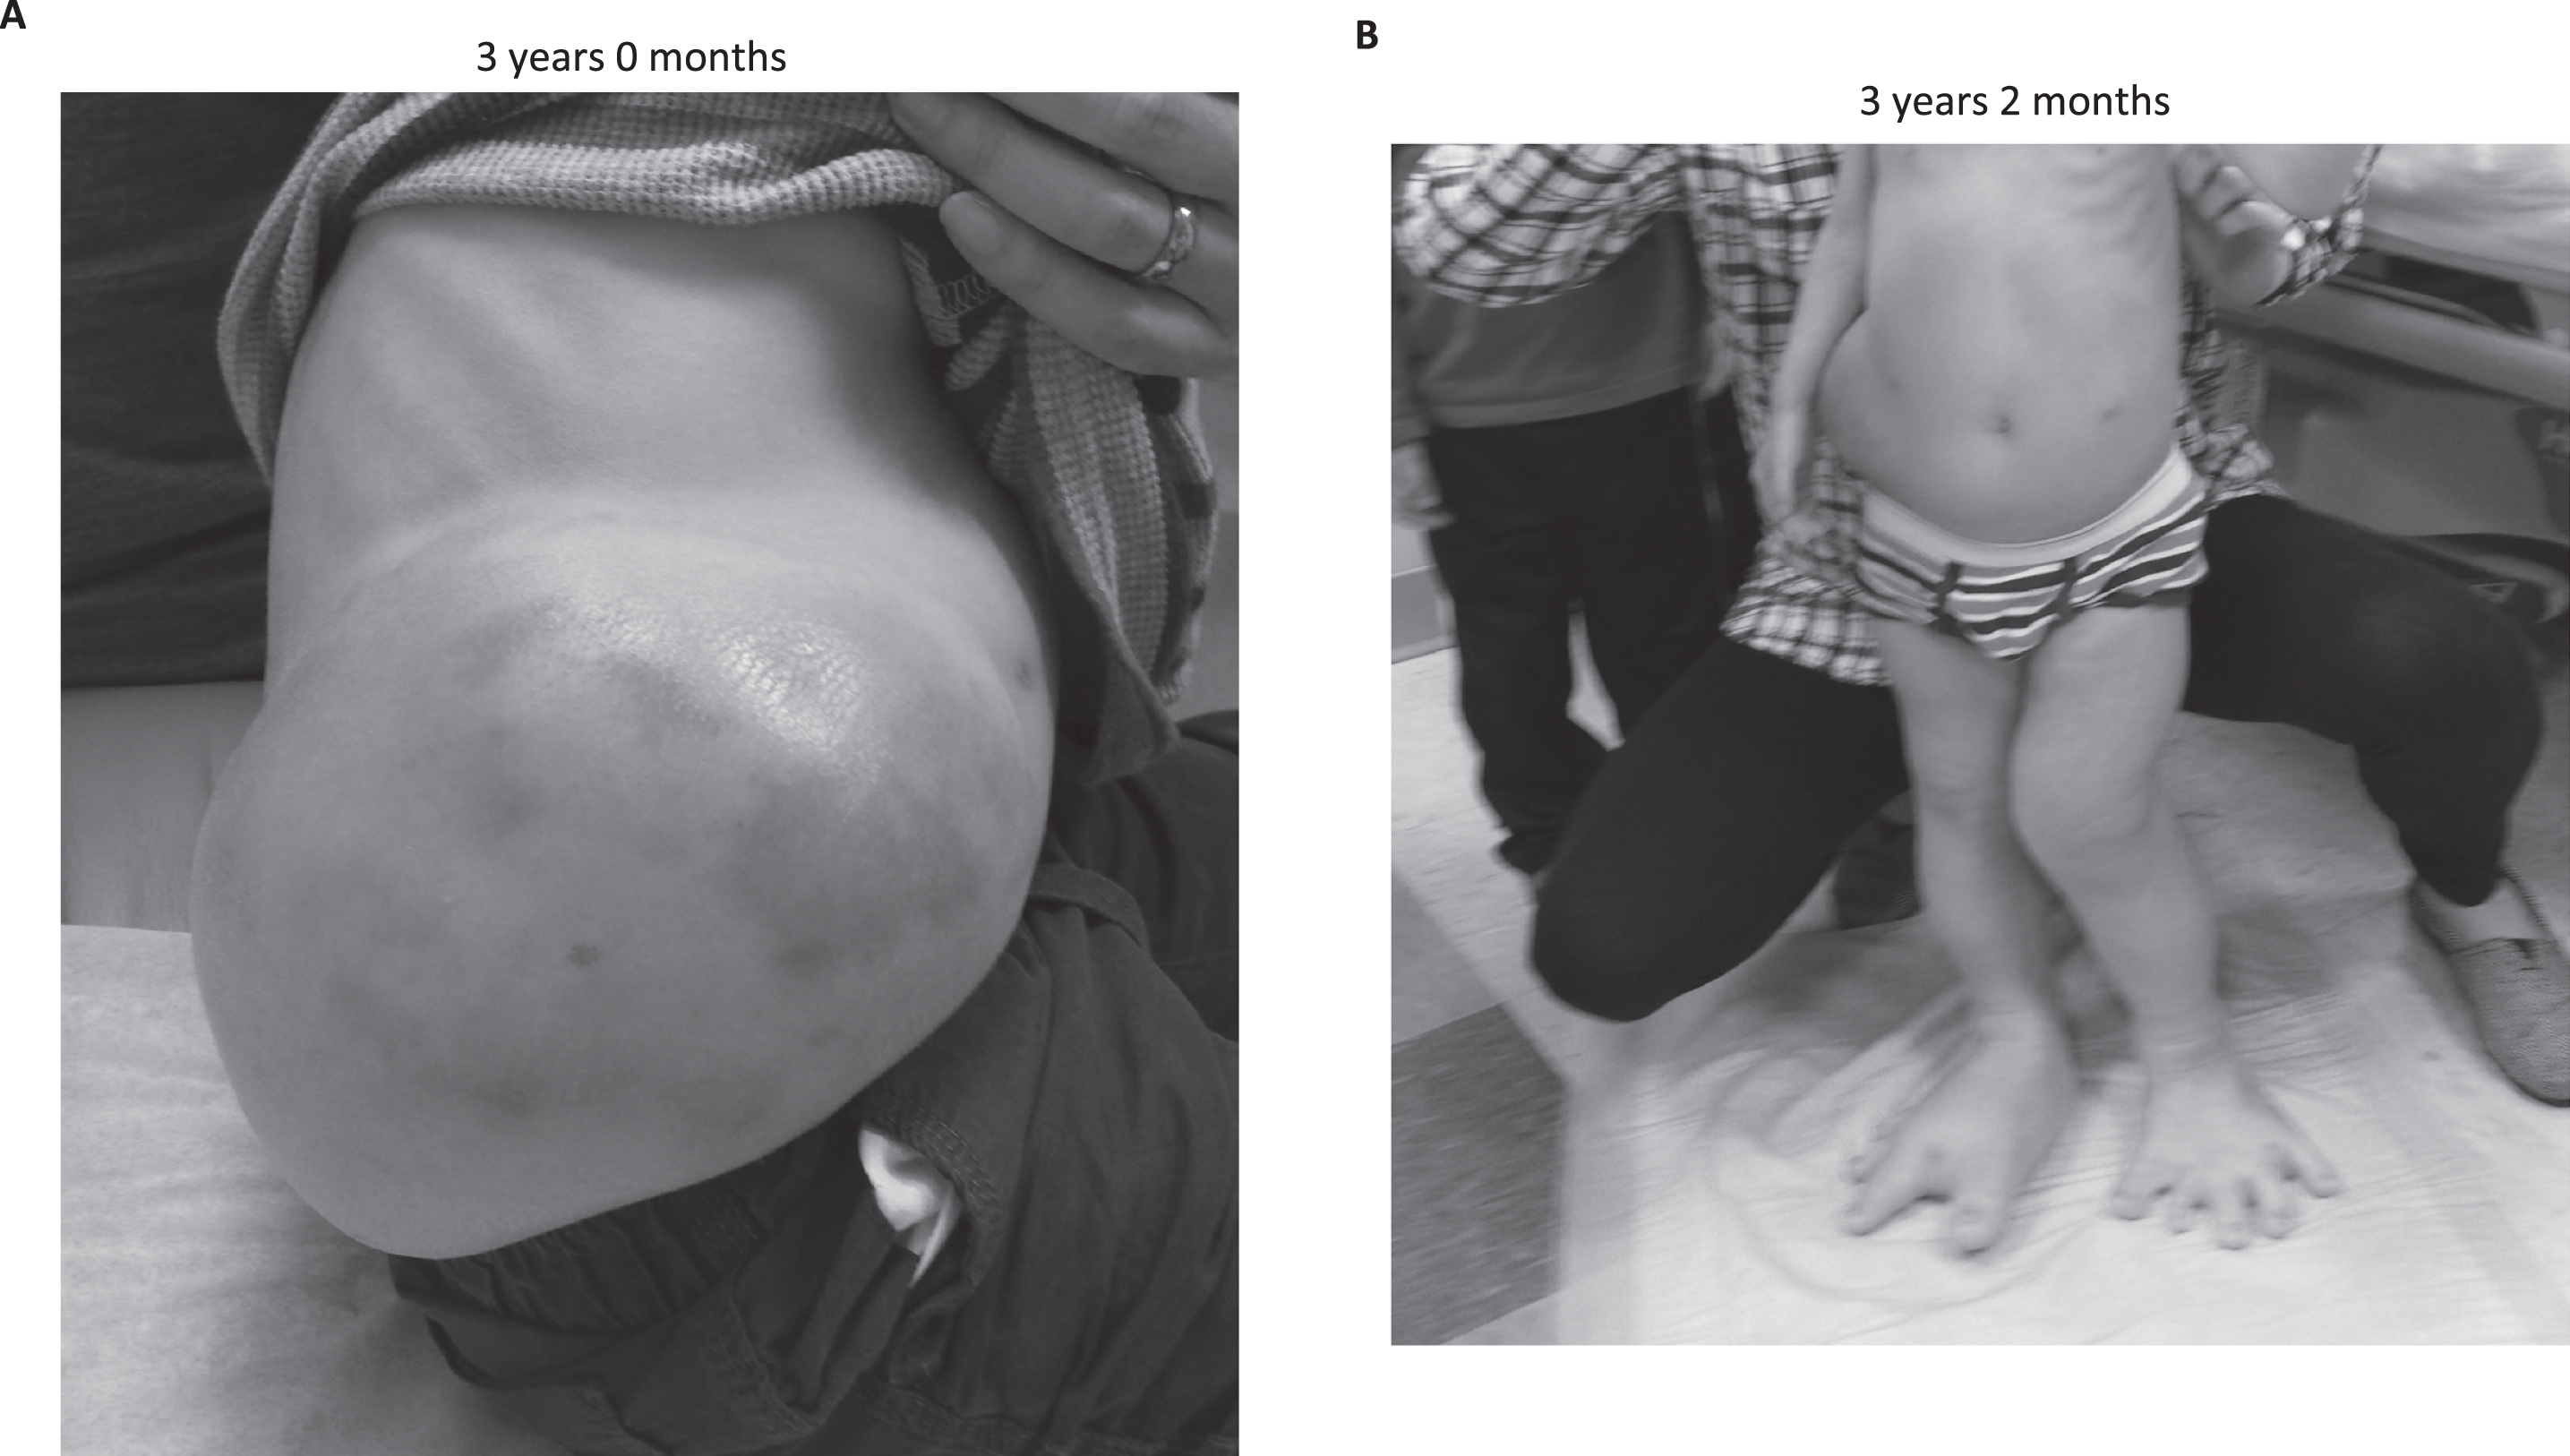 Clinical improvement after initiation of sirolimus therapy. A) Initial examination revealed a taught, painful 26 cm×16 cm right flank mass extending from the costal margin to the sacrum and several port-wine stains. B.) There was a noticeable clinical reduction in the flank mass within 2 months of sirolimus initiation.